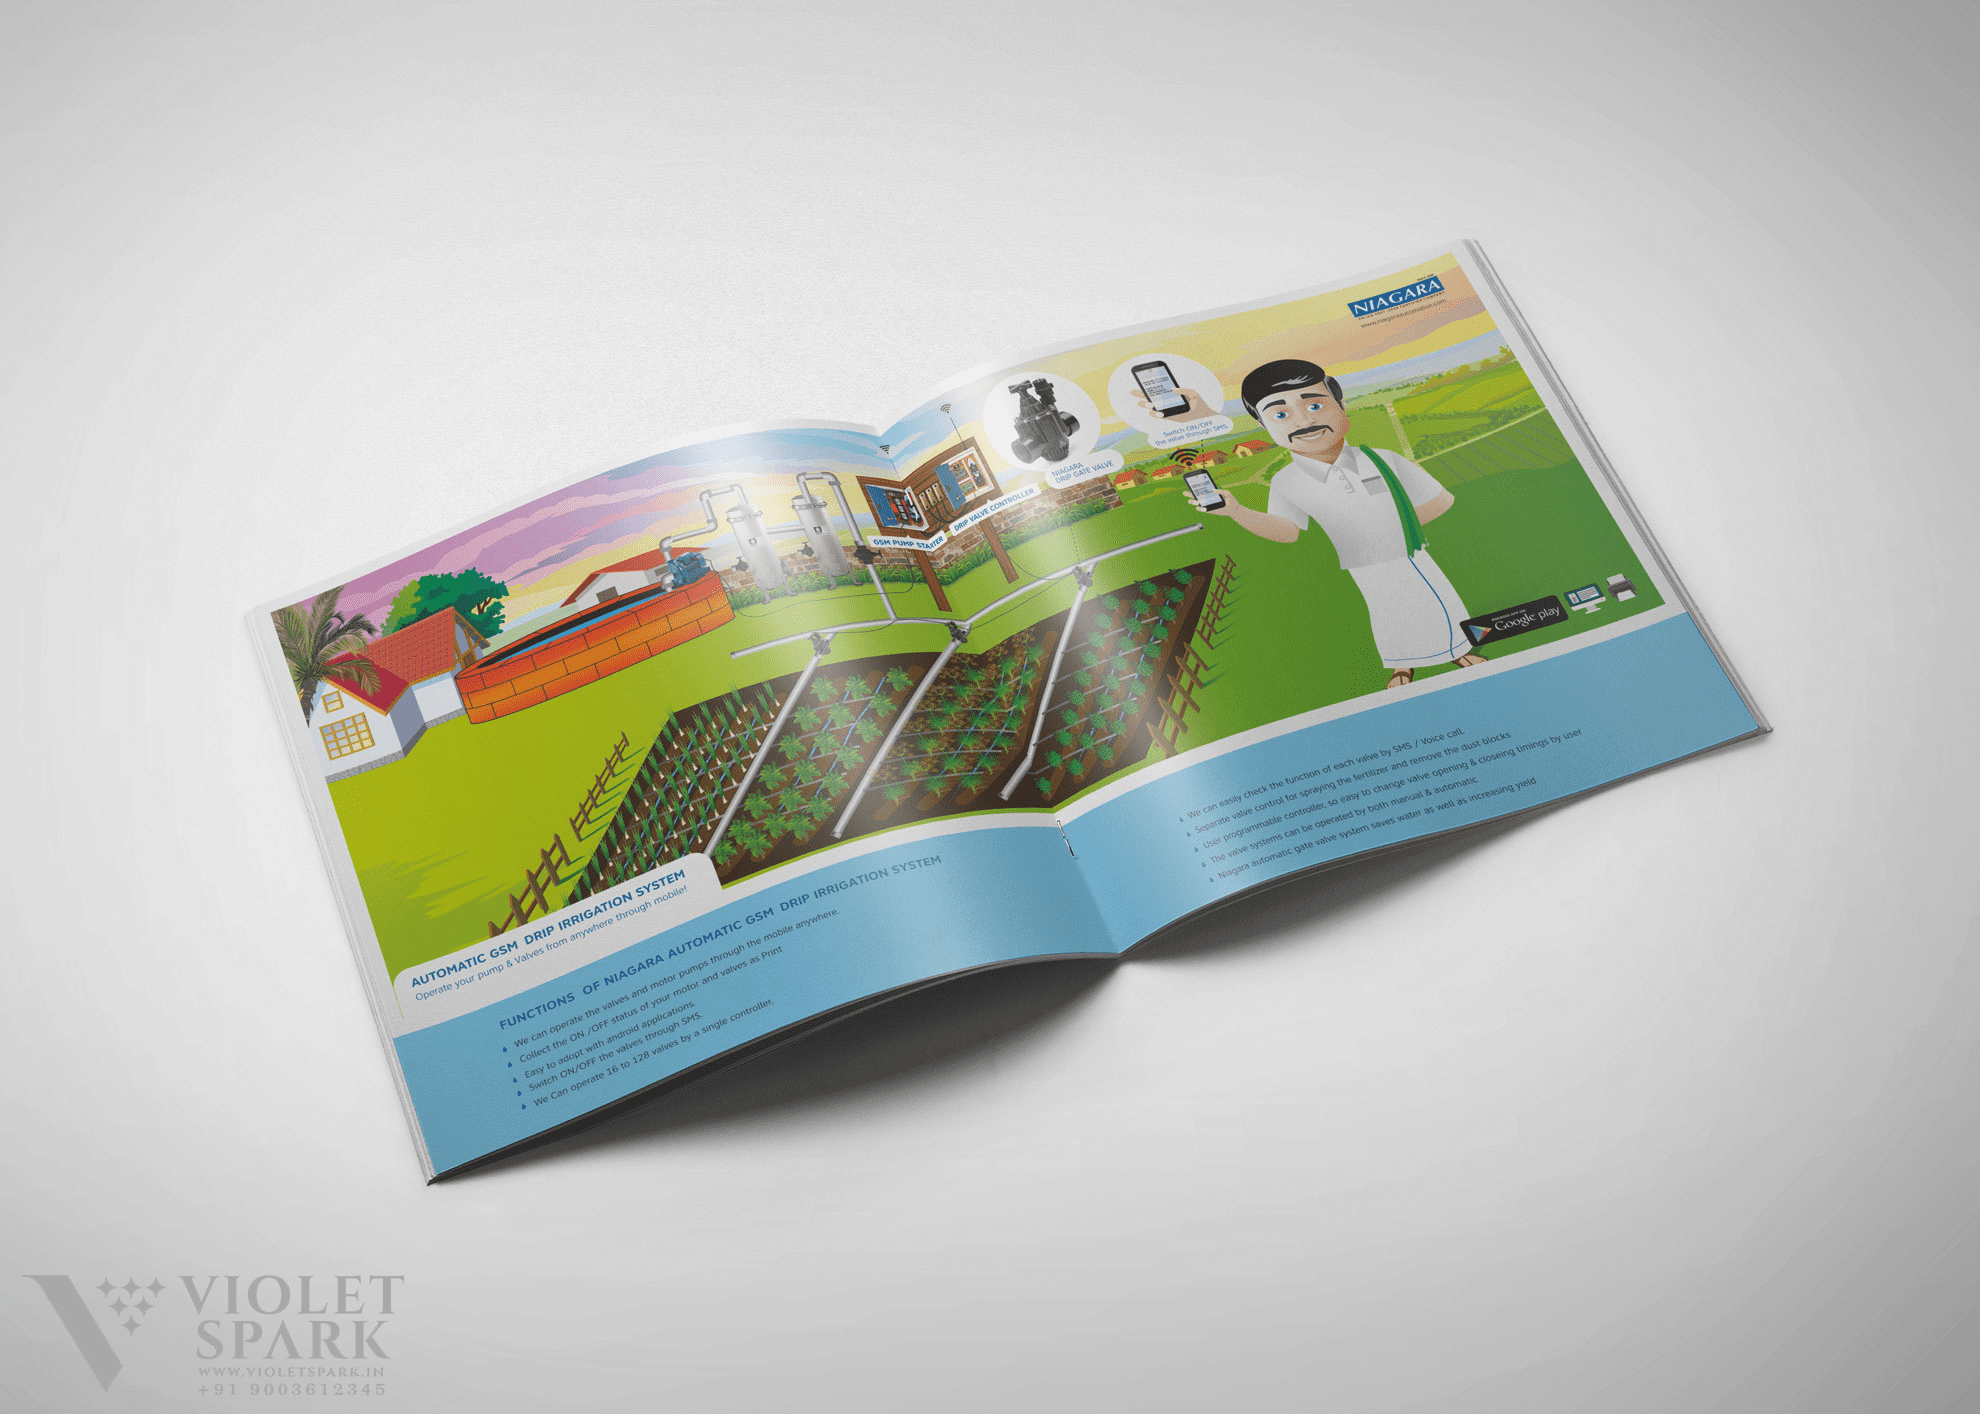 Niagara Solutions Brochure Inner Pages Graphic Design, Branding Packaging Design in Karur by Creative Prints thecreativeprints